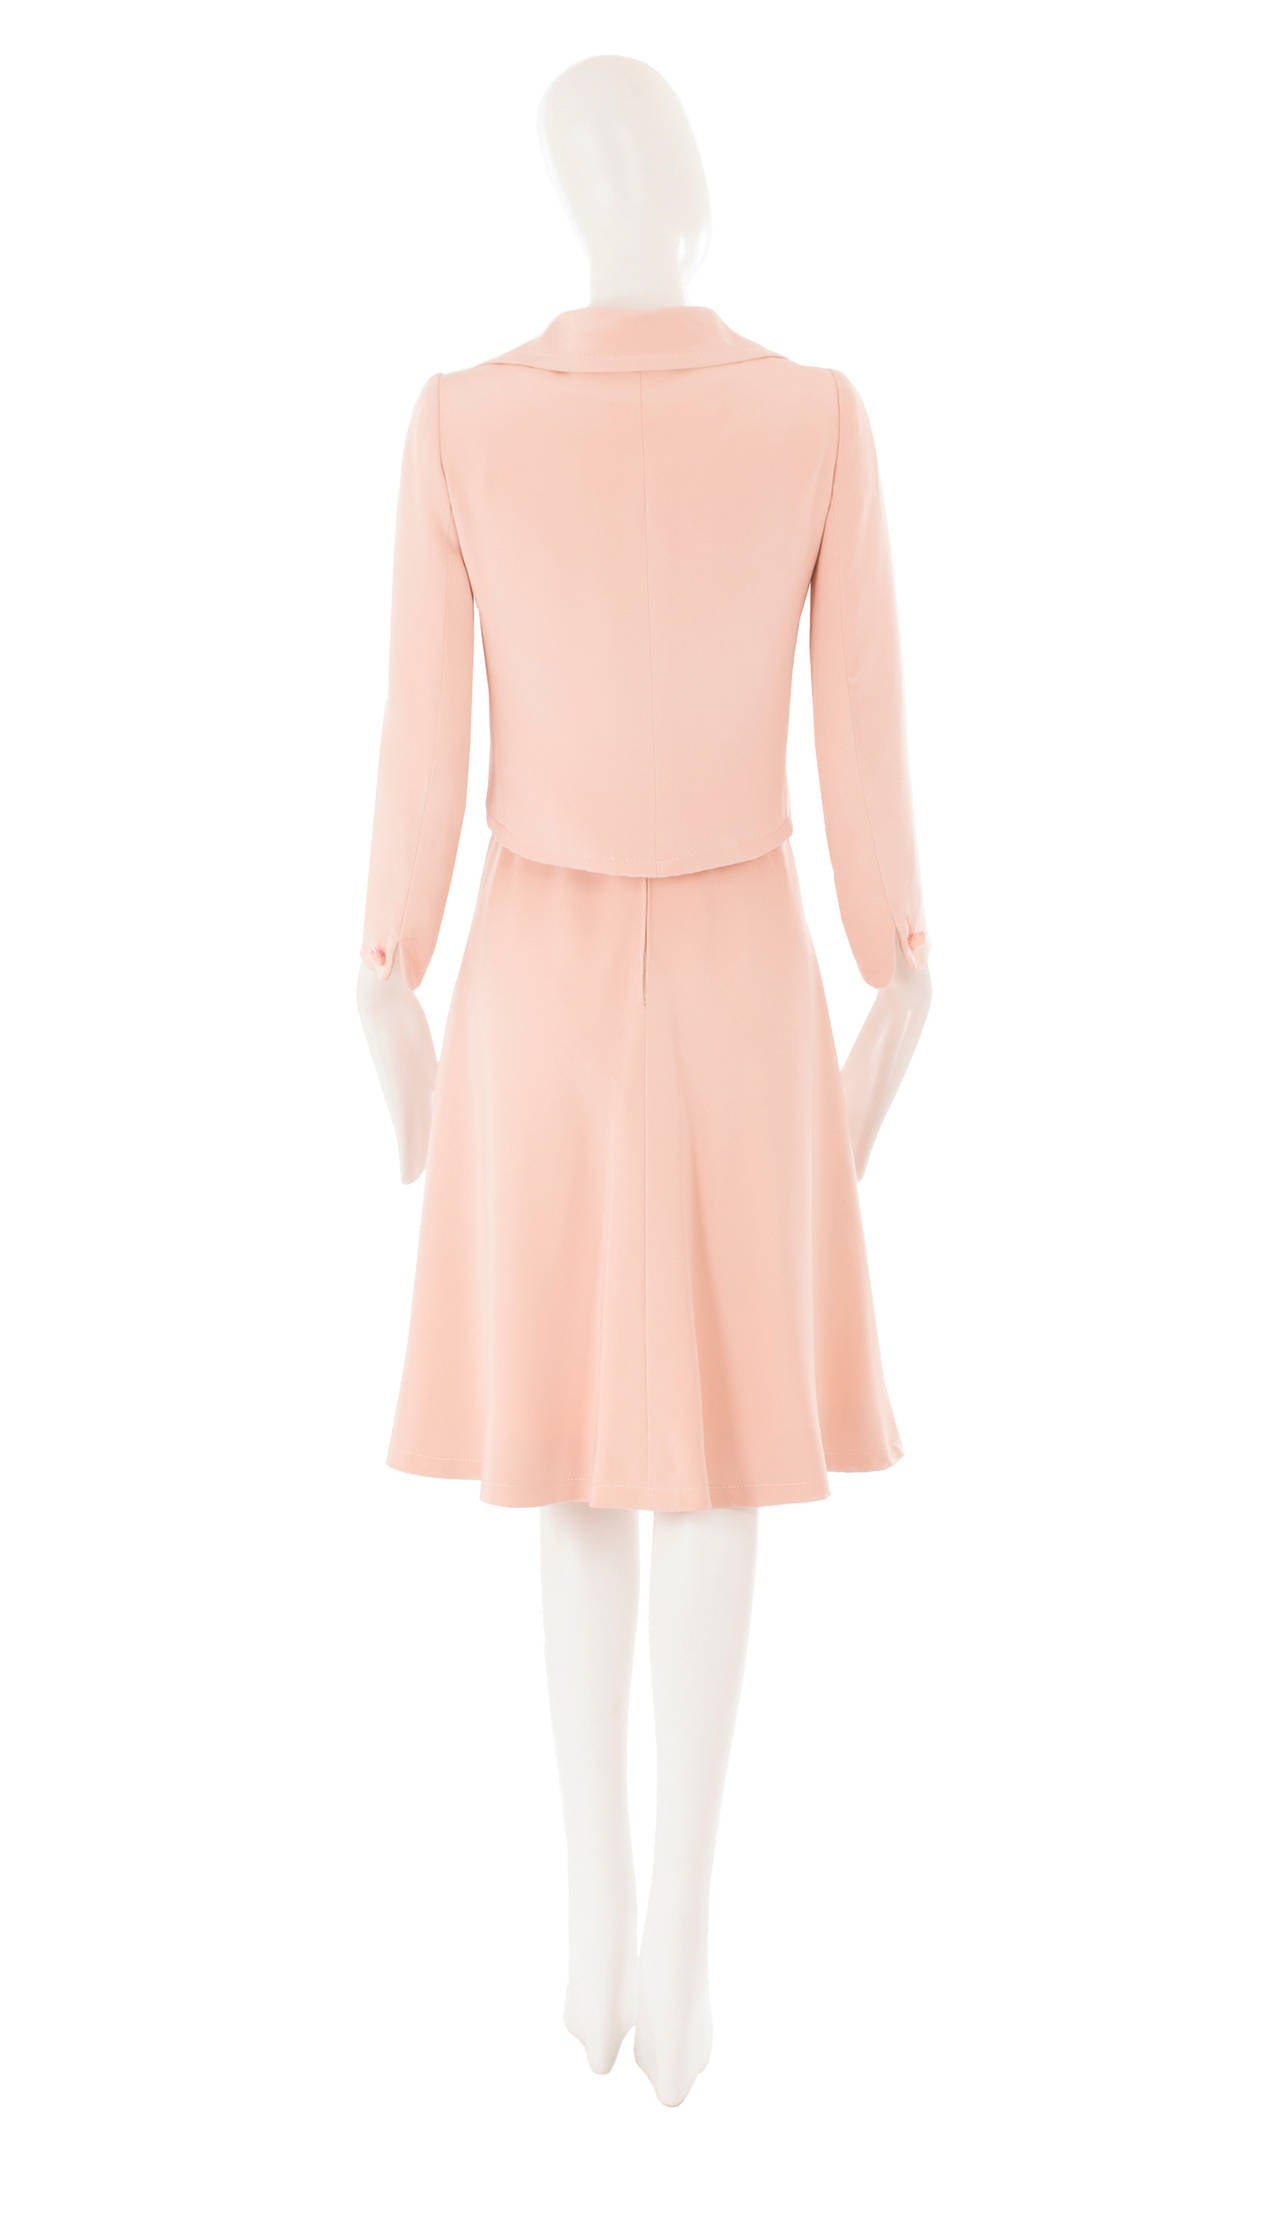 Guy Laroche Pink Silk Haute Couture Dress Suit, Circa 1970 In Excellent Condition For Sale In London, GB